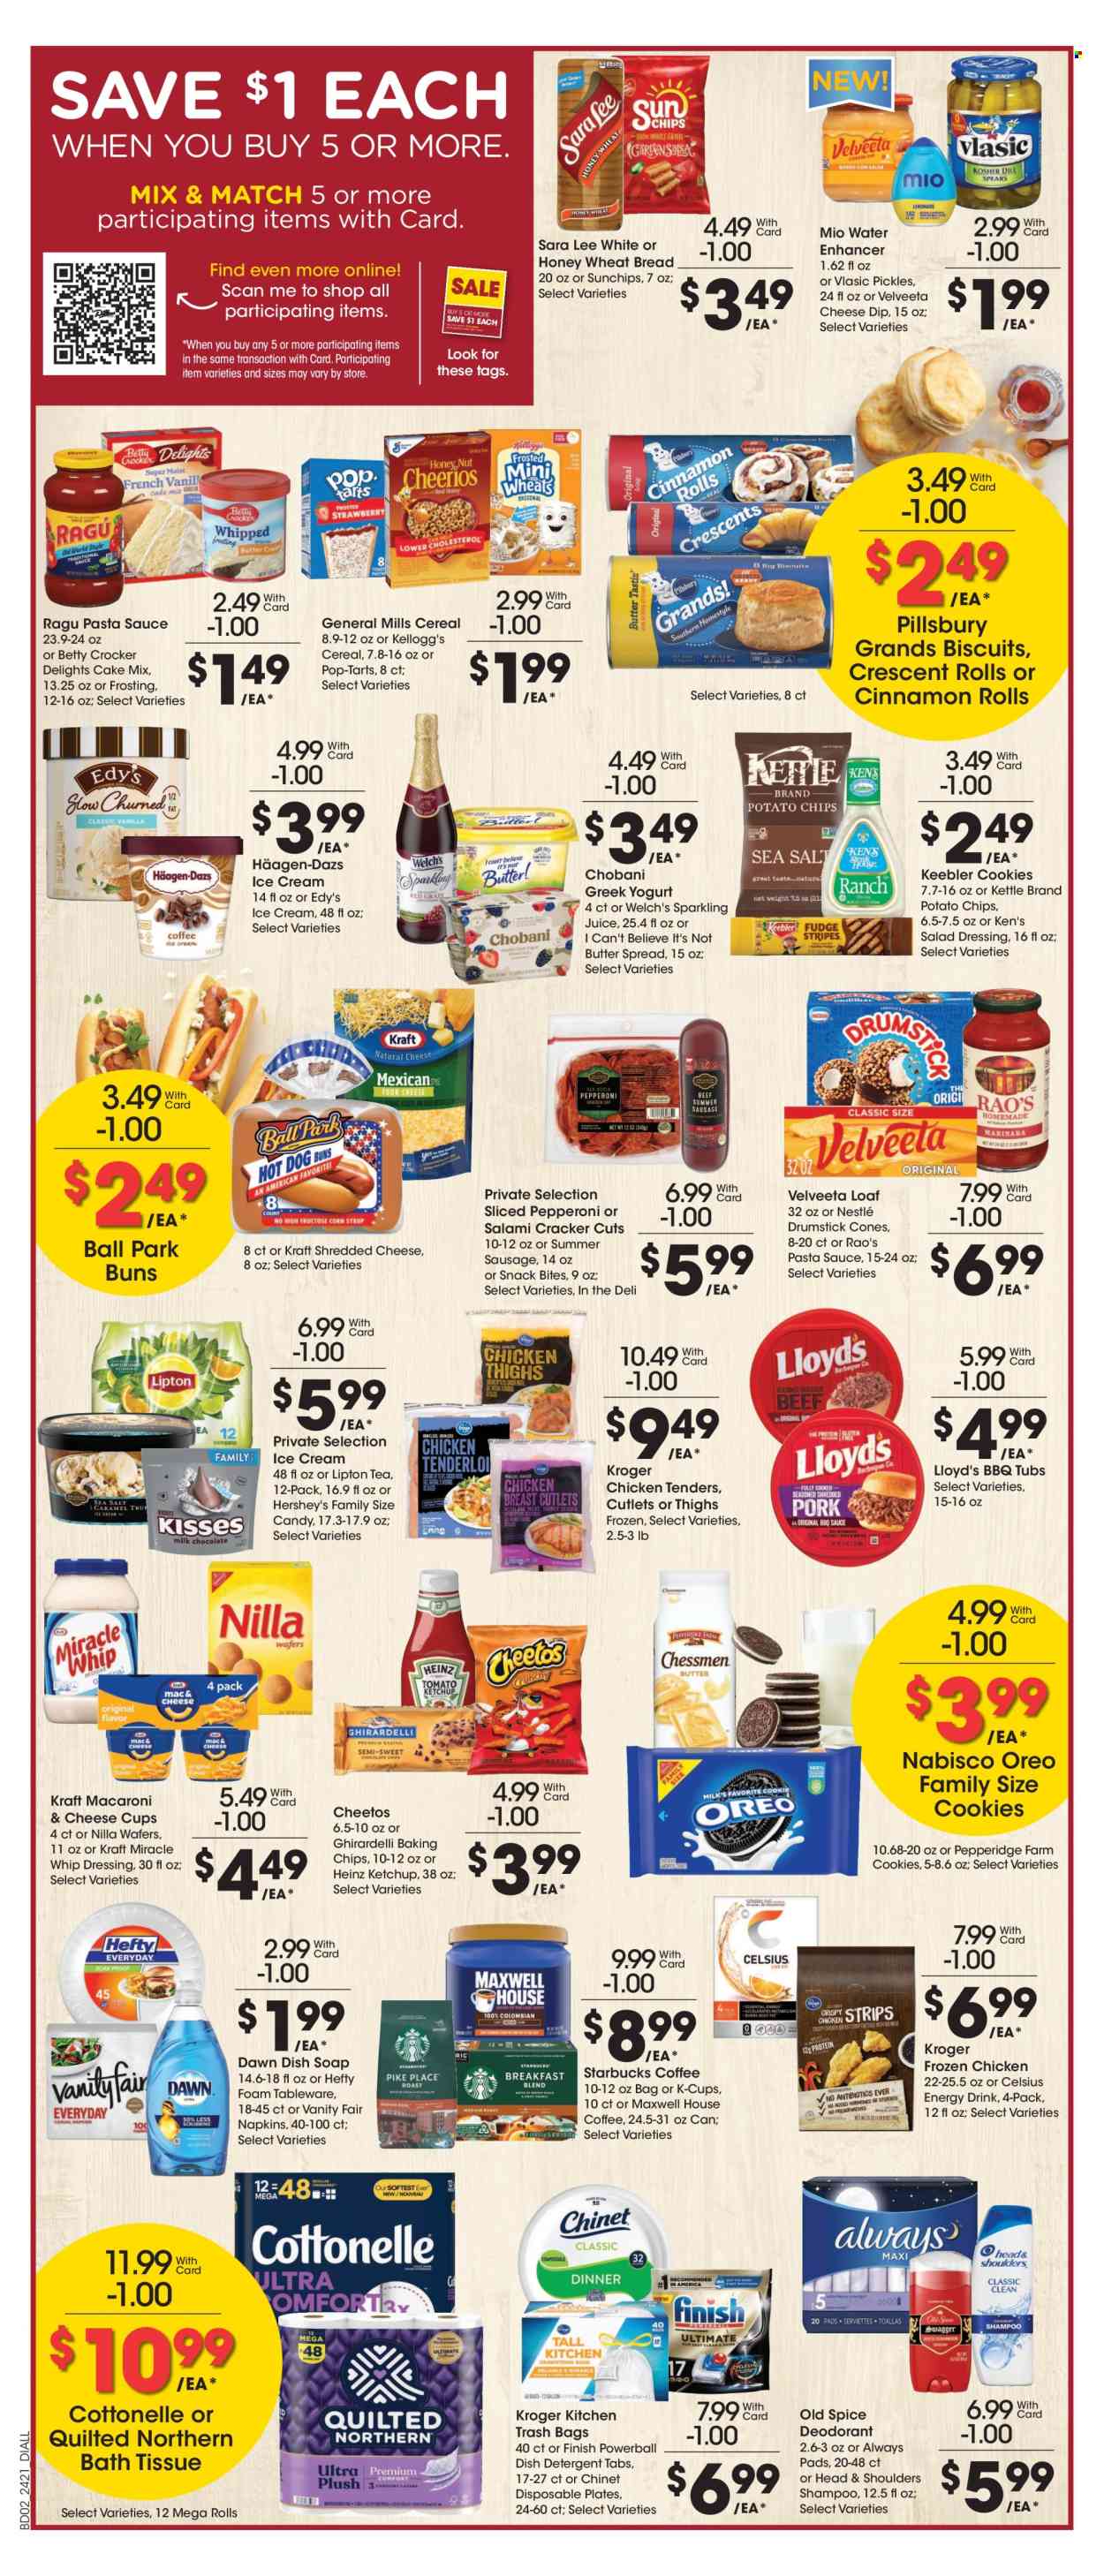 thumbnail - Dillons Flyer - 06/26/2024 - 07/04/2024 - Sales products - bread, wheat bread, buns, Sara Lee, cinnamon roll, crescent rolls, cake mix, Welch's, macaroni & cheese, pasta sauce, chicken tenders, snack, Pillsbury, Kraft®, spaghetti sauce, ready meal, salami, summer sausage, pepperoni, shredded cheese, Velveeta, greek yoghurt, Oreo, Chobani, snack bar, margarine, I Can't Believe It's Not Butter, mayonnaise, Miracle Whip, dip, ice cream, Hershey's, Häagen-Dazs, ice cones, Nestlé, Kellogg's, biscuit, Pop-Tarts, Ghirardelli, Keebler, Candy, Nabisco, General Mills, potato chips, Cheetos, salty snack, frosting, baking chips, baking mix, Heinz, pickles, pickled vegetables, salad dressing, ketchup, dressing, syrup, juice, energy drink, Lipton, sparkling juice, Maxwell House, Starbucks, coffee capsules, K-Cups, napkins, bath tissue, Cottonelle, Quilted Northern, pads, detergent, dishwashing liquid, Finish Powerball, shampoo, Old Spice, Always pads, sanitary pads, Head & Shoulders, deodorant, Hefty, trash bags, tableware, plate. Page 3.